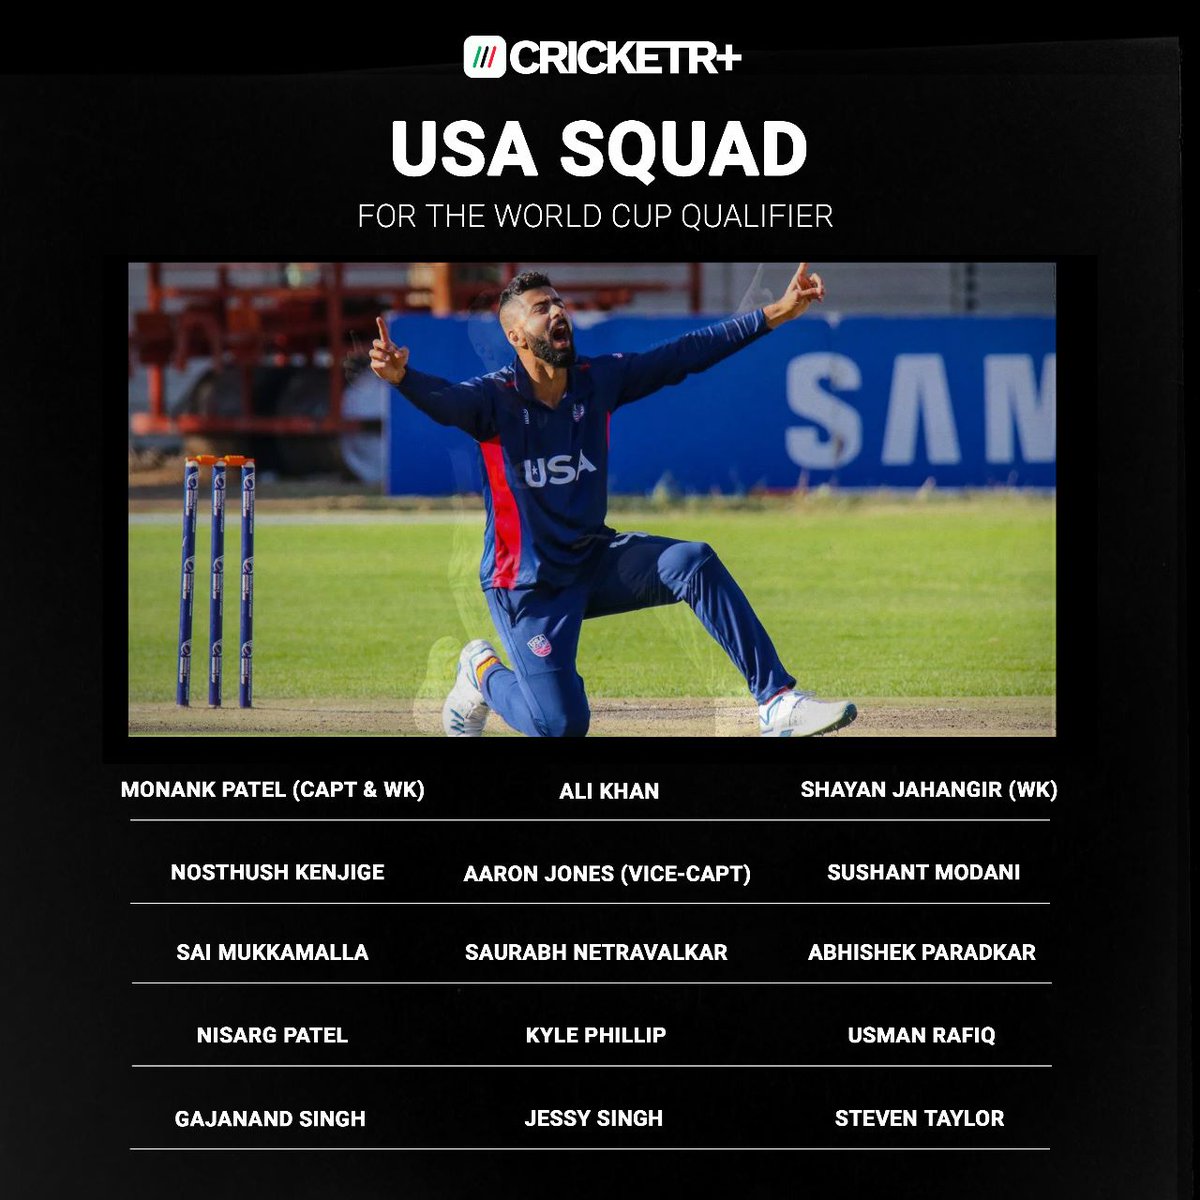 USA Squad for the World Cup Qualifier 

#CricketR